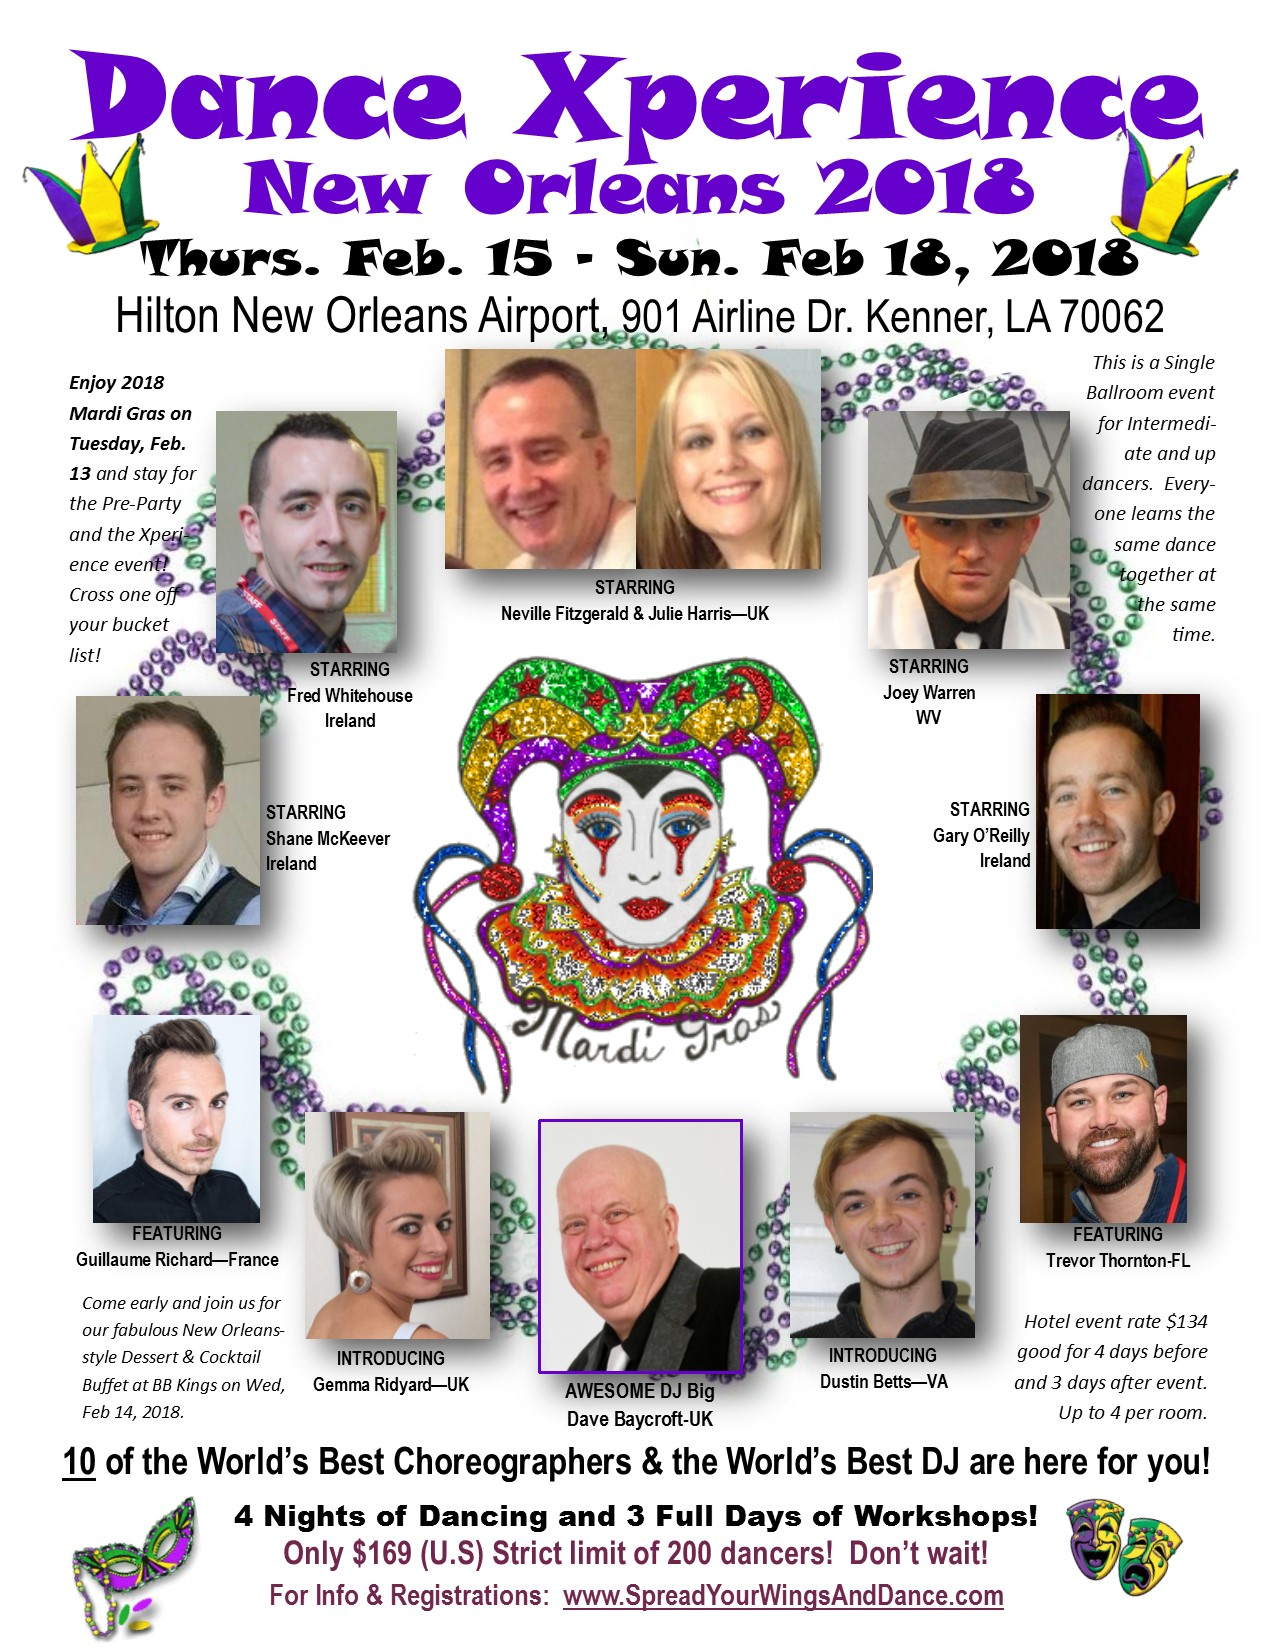 ance Xperien e 
New Orleans 201& 
Feb. 15 - Sen. Feb 1', 201' 
Hilton New Orleans AirporL901 Airline Dr. Kenner, LA 70062 
Enjoy 2018 
Mardi Gras on 
Tuesday, Feb. 
13 and stay for 
the Pre-Party 
and the XP 
ence O 
Cross one o 
your bucket 
list! 
FEATURING 
e 
STARRING 
red Whitehouse 
Ireland 
TARRING 
hane McKeever 
reland 
ARRING 
Neville Fitzgerald & Julie Harrisâ€”UK 
AWESOME DJ Big 
Dave Baycroft-UK 
ARRING 
Joey Warren 
STARRING 
Gary O'Reilly 
Ireland 
This is a Single 
Ballroom event 
for Intermedi- 
ate and up 
dancers. Every 
one leams the 
same dance 
gether at 
Qhe same 
C time. 
FEATURING 
Trevor Thornton-FL 
Guillaume Richardâ€”France 
Come early and join us for 
our fabulous New Orleans- 
style Dessert & Cocktail 
Buffet at BB Kings on Wed, 
Feb 14, 2018. 
INTRODUCING 
Gemma Ridyardâ€”UK 
INTRODUCING 
Dustin Bettsâ€”VA 
Hotel event rate $134 
good for 4 days before 
and 3 days after event. 
Up to 4 per room. 
10 of the World's Best Choreographers & the World's Best DJ are here for you! 
4 Nights of Dancing and 3 Full Days of Workshops! 
Only $169 (U.S) Strict limit of 200 dancers! Don't wait! 
For Info & Registrations: www.SpreadYourWingsAndDance.com 